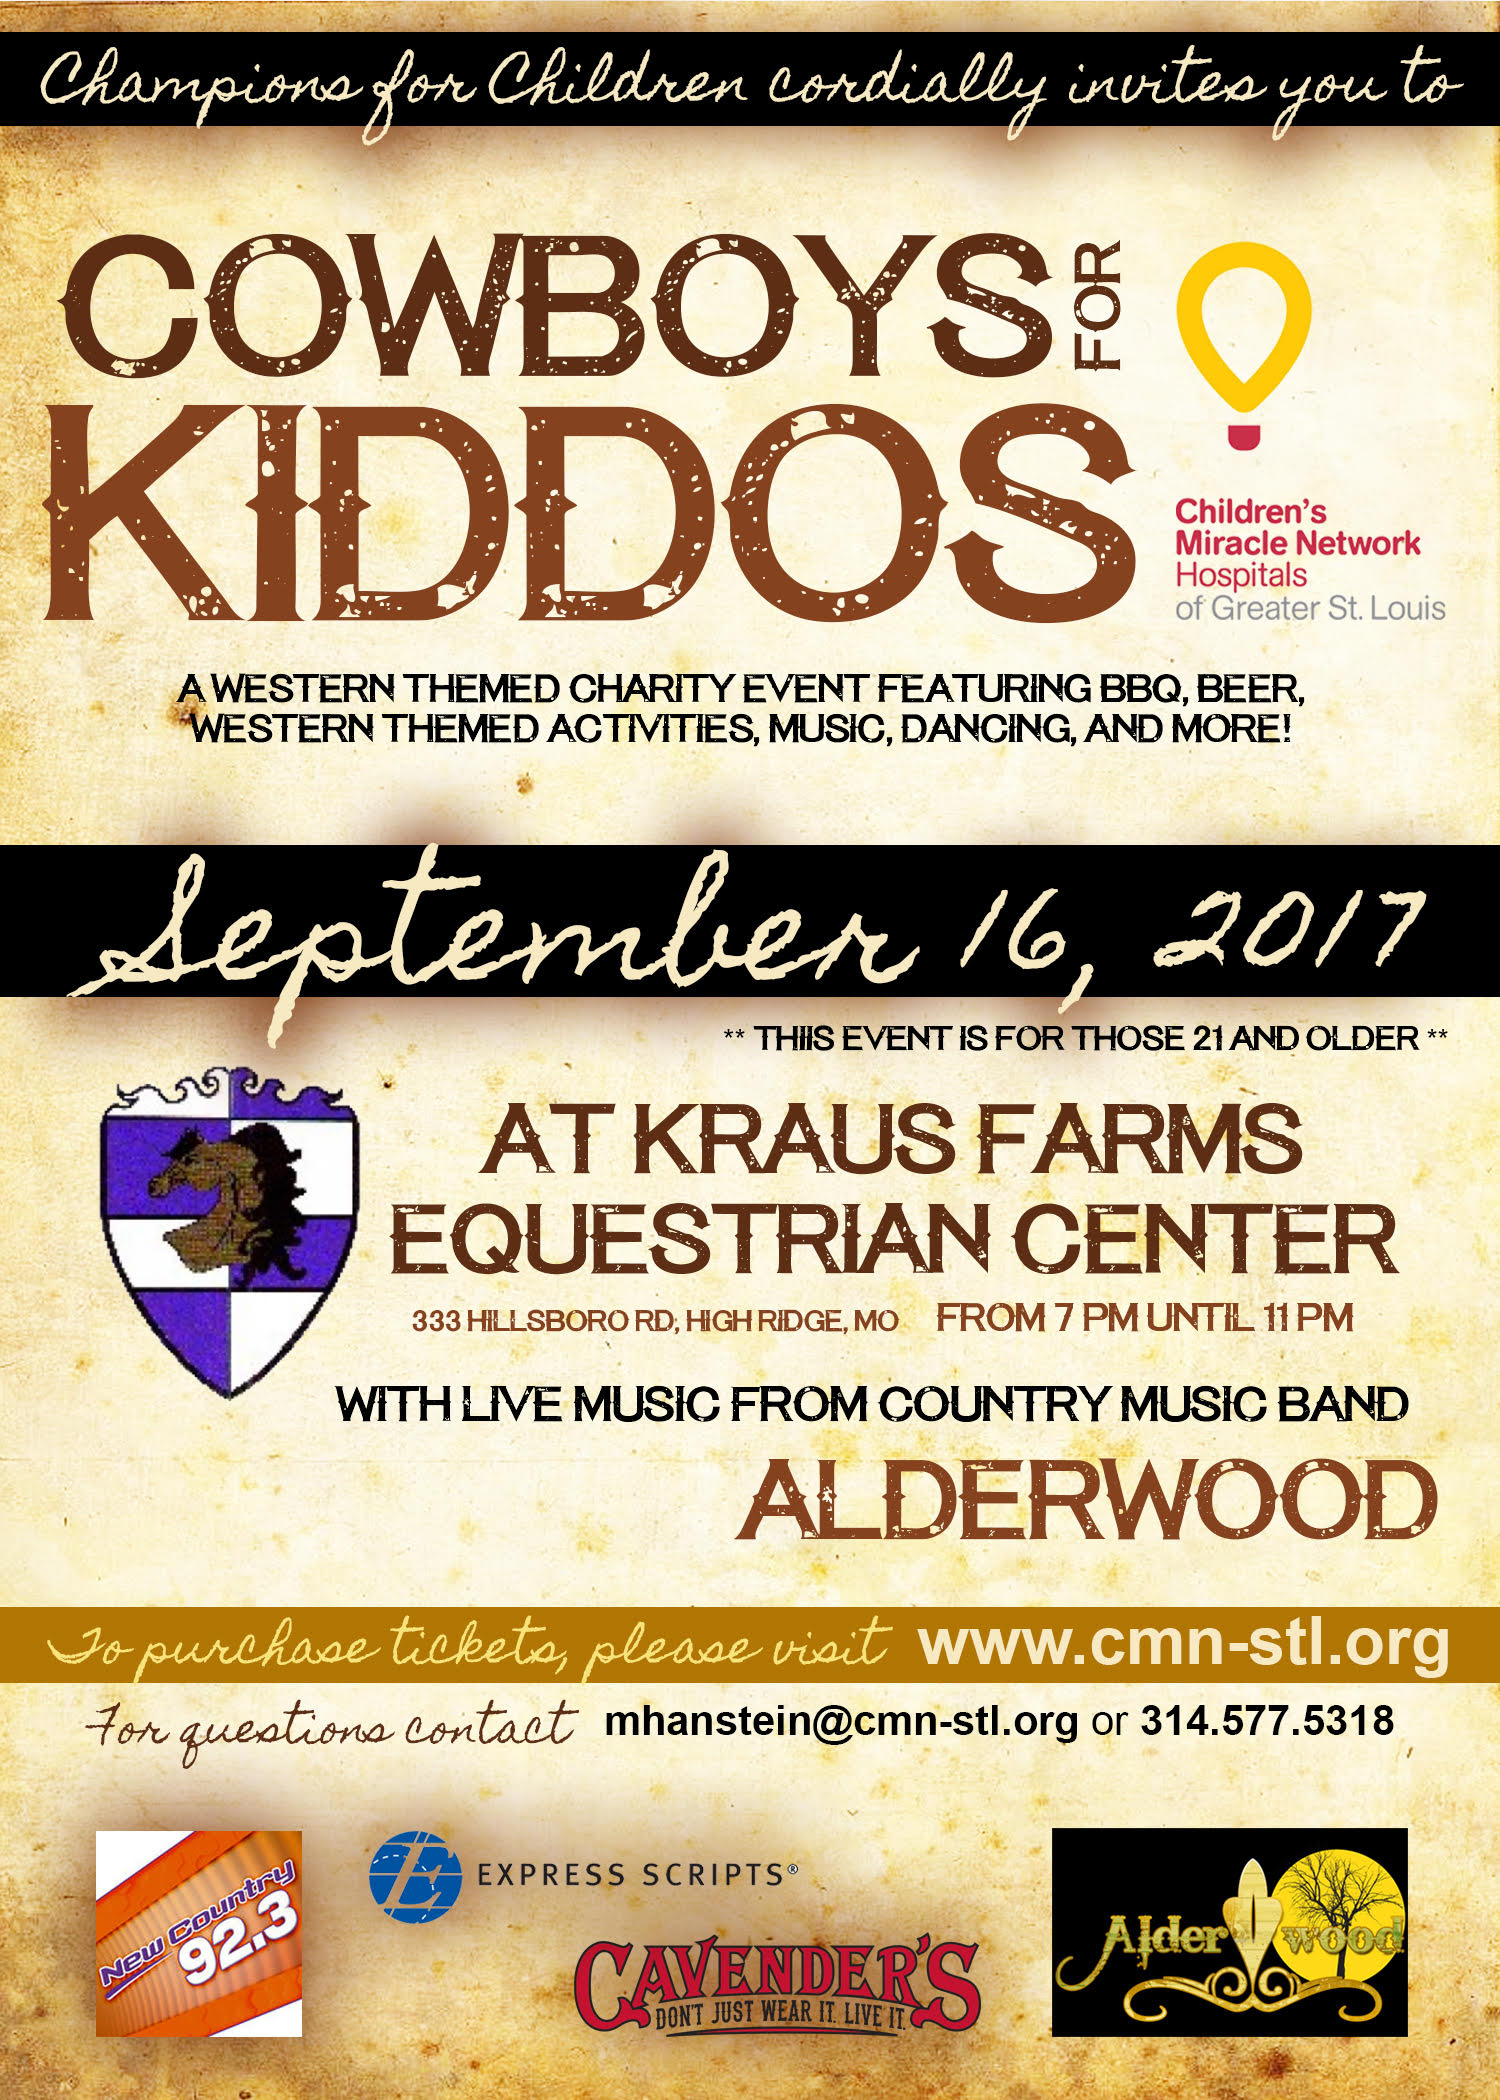 Cowboys for Kiddos - September 16, 2017 to benefit Children's Miracle Network Hospitals of St. Louis